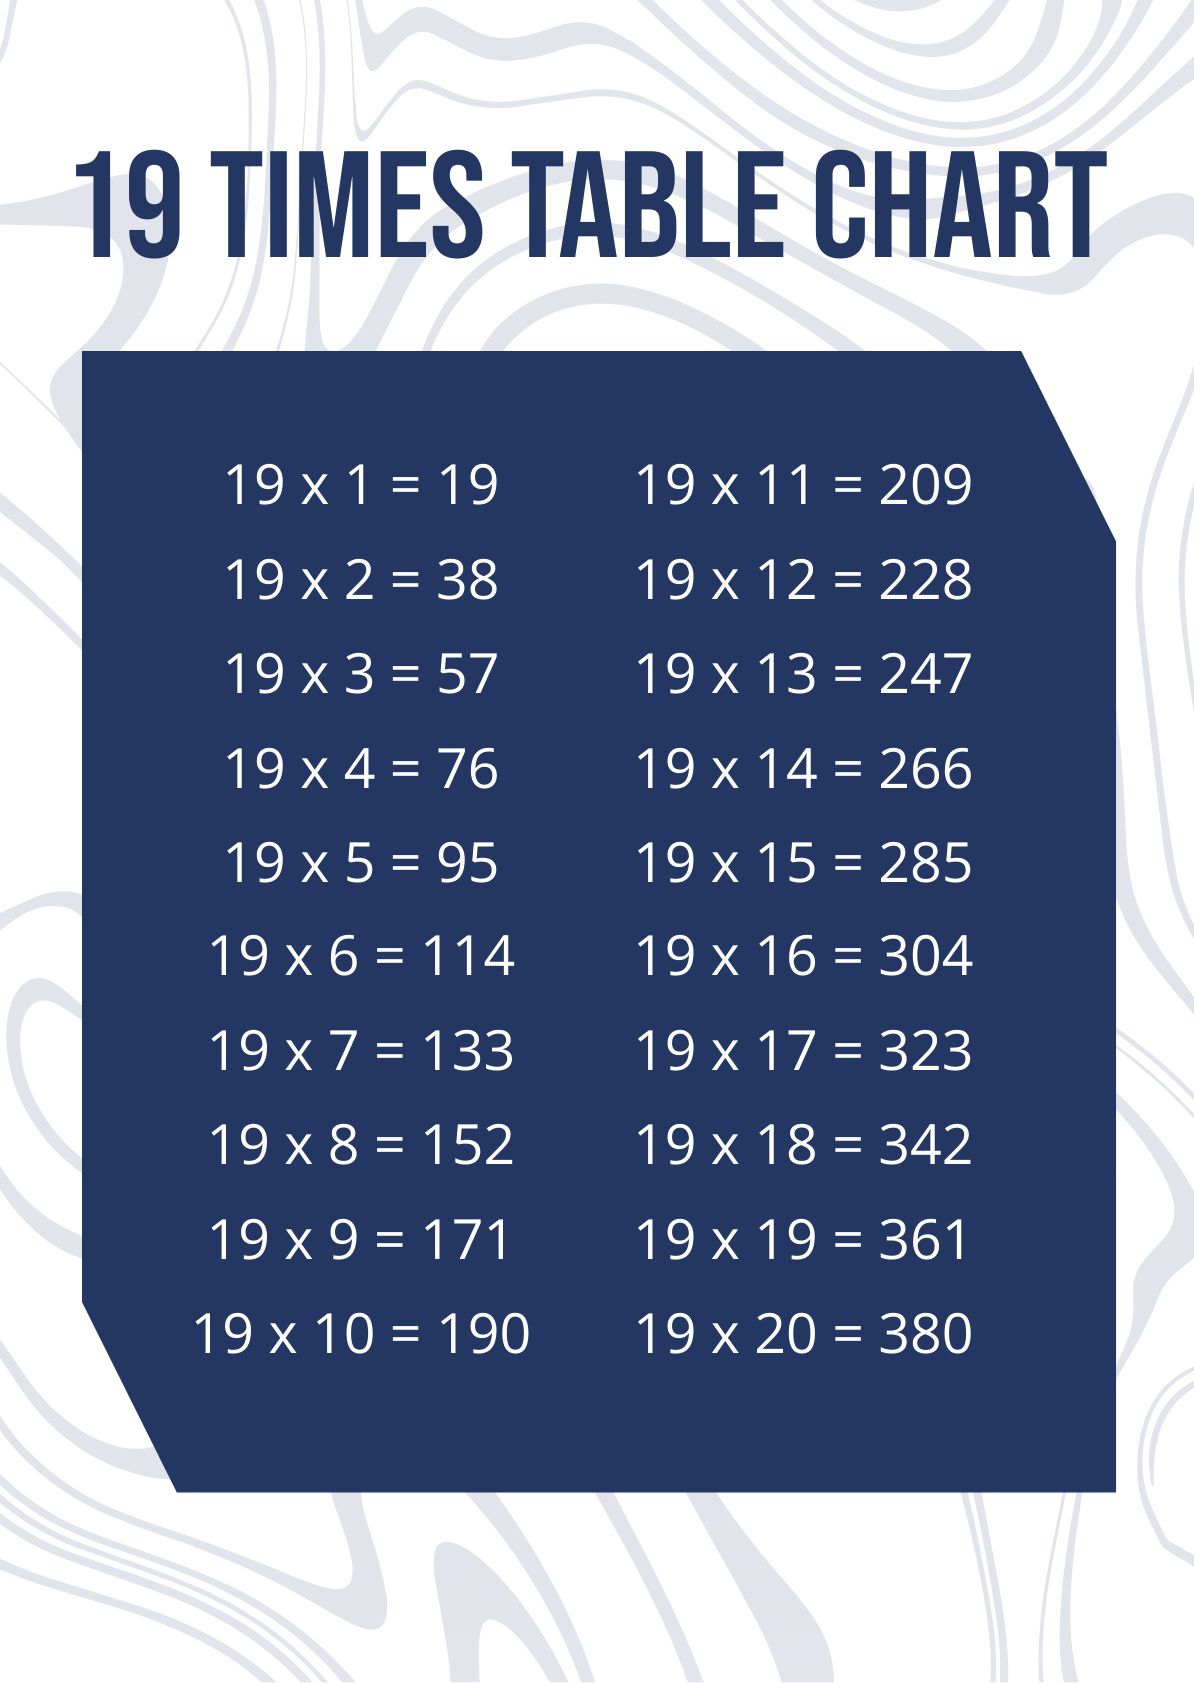 19 Times Table Chart in PDF